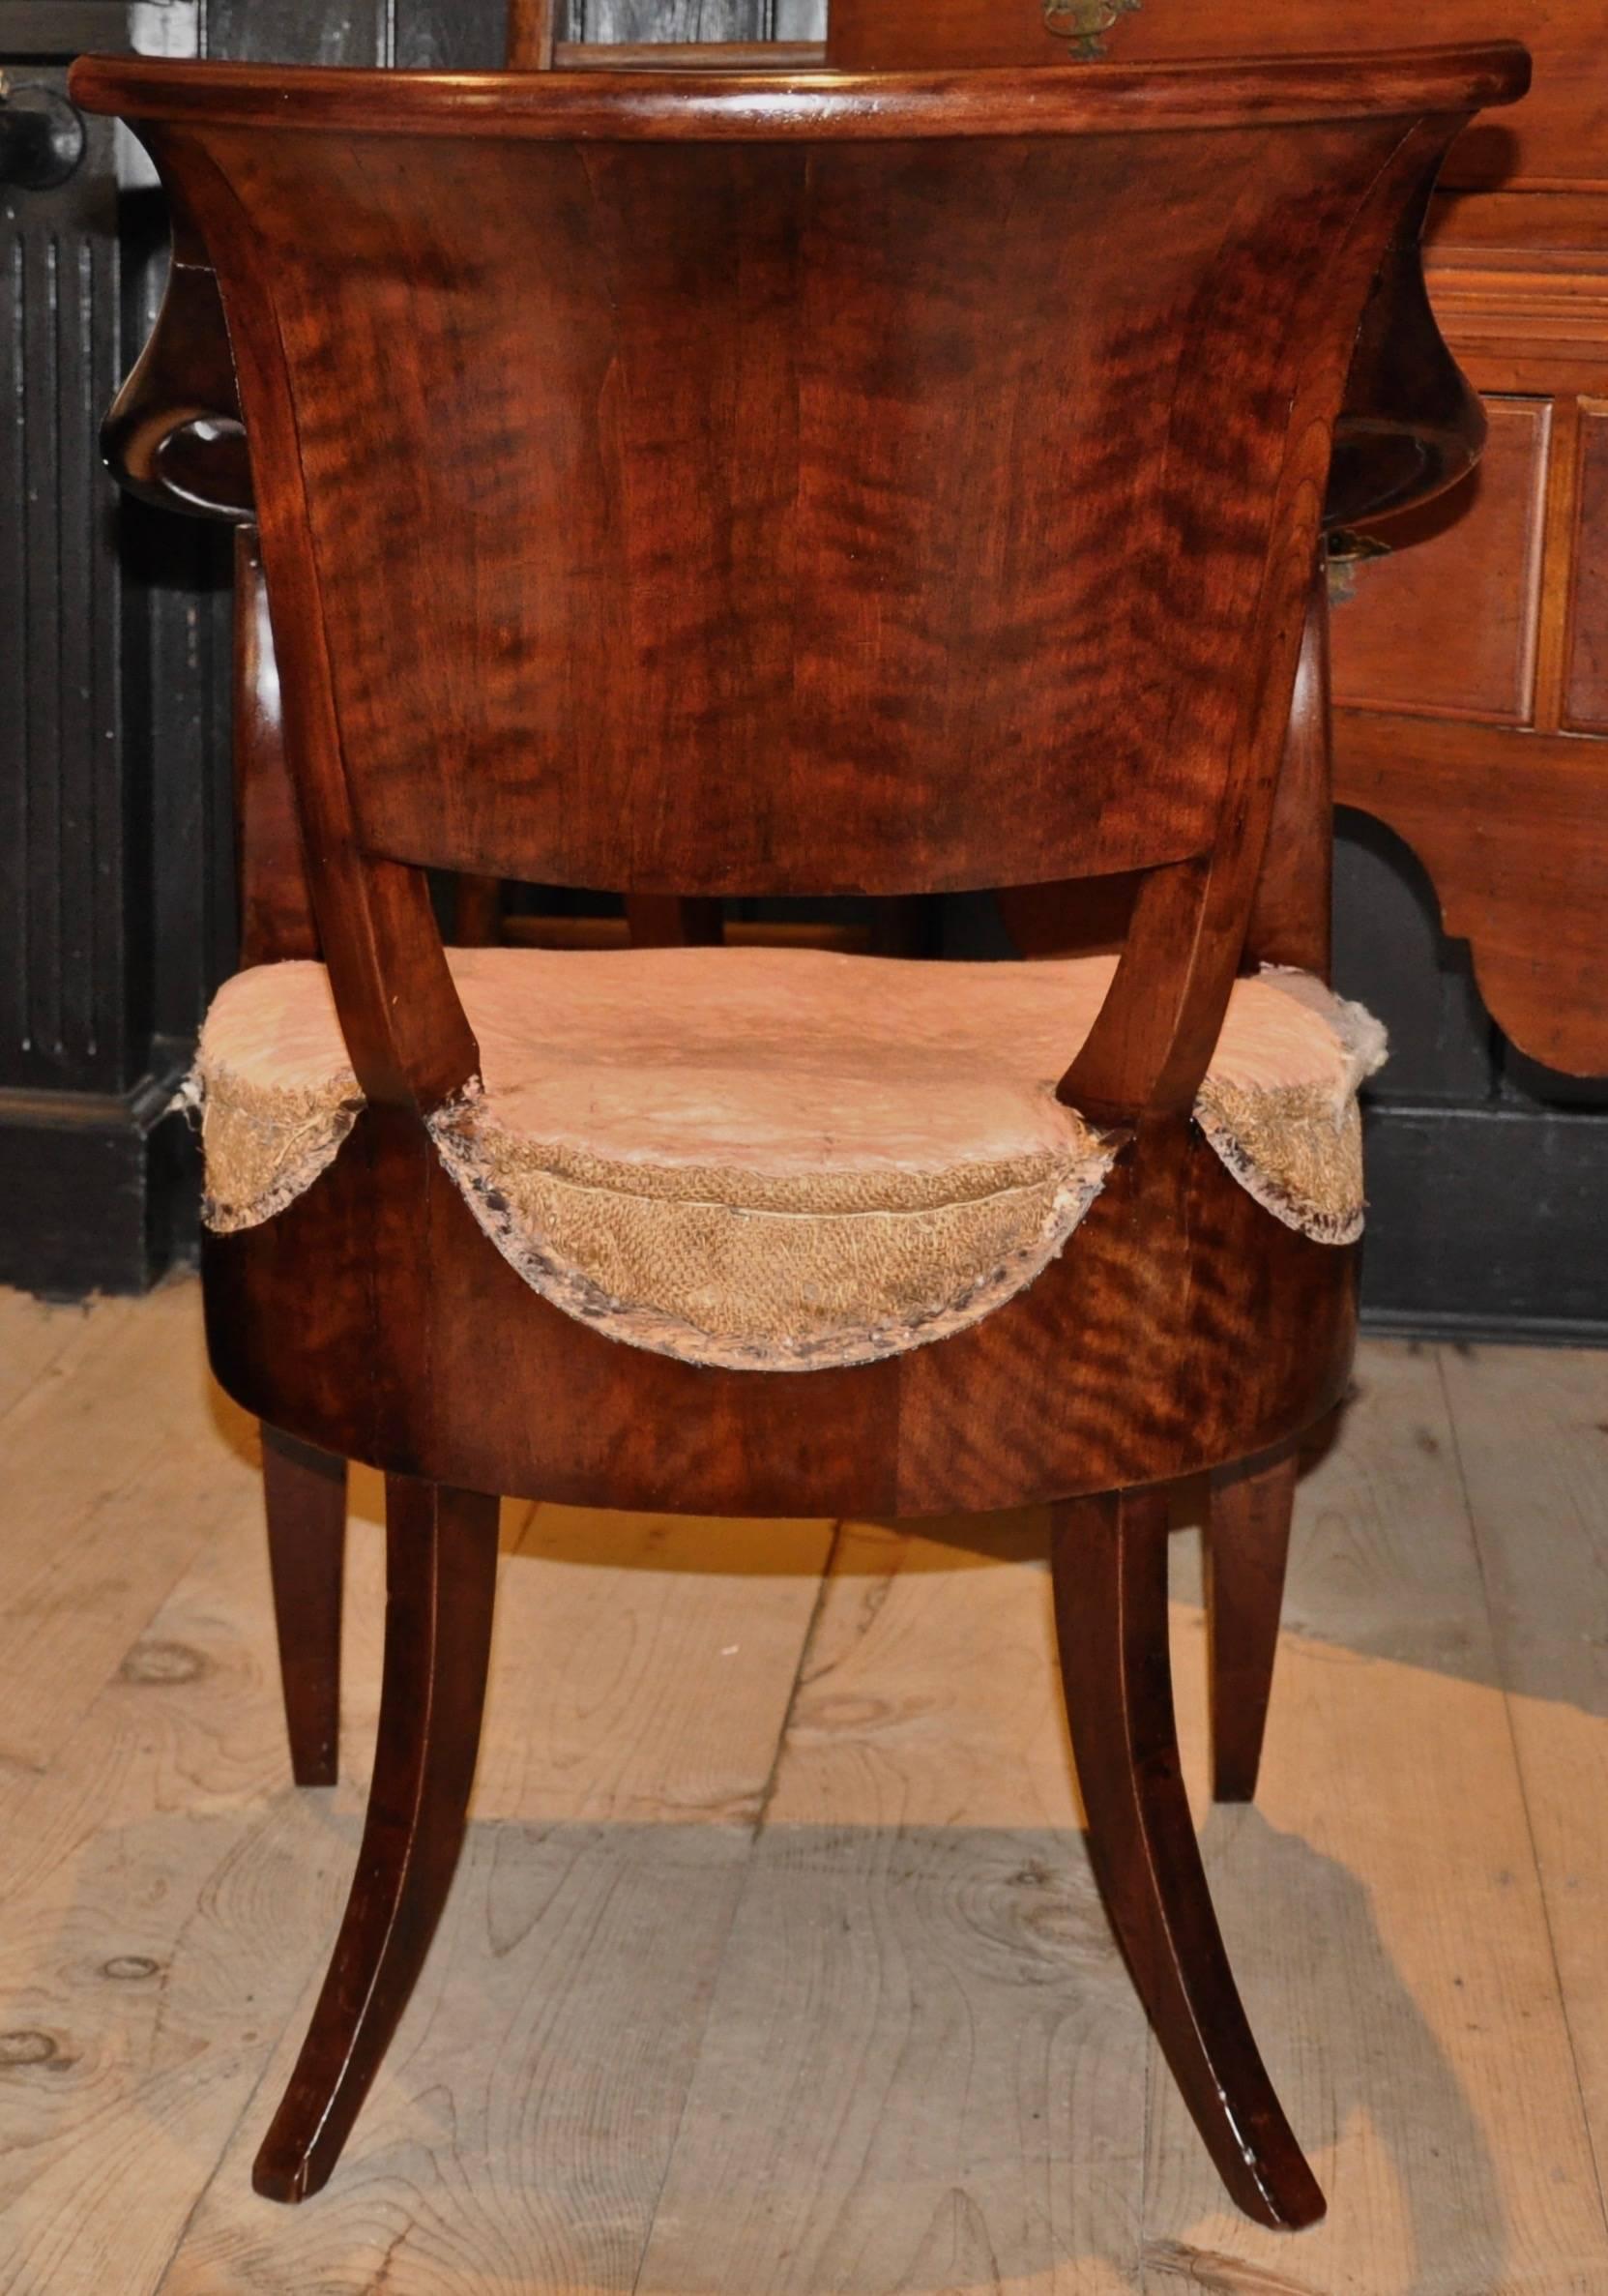 Pair of Period Russian or Austrian Neoclassical Walnut Chairs with Lion Motif In Excellent Condition For Sale In Essex, MA